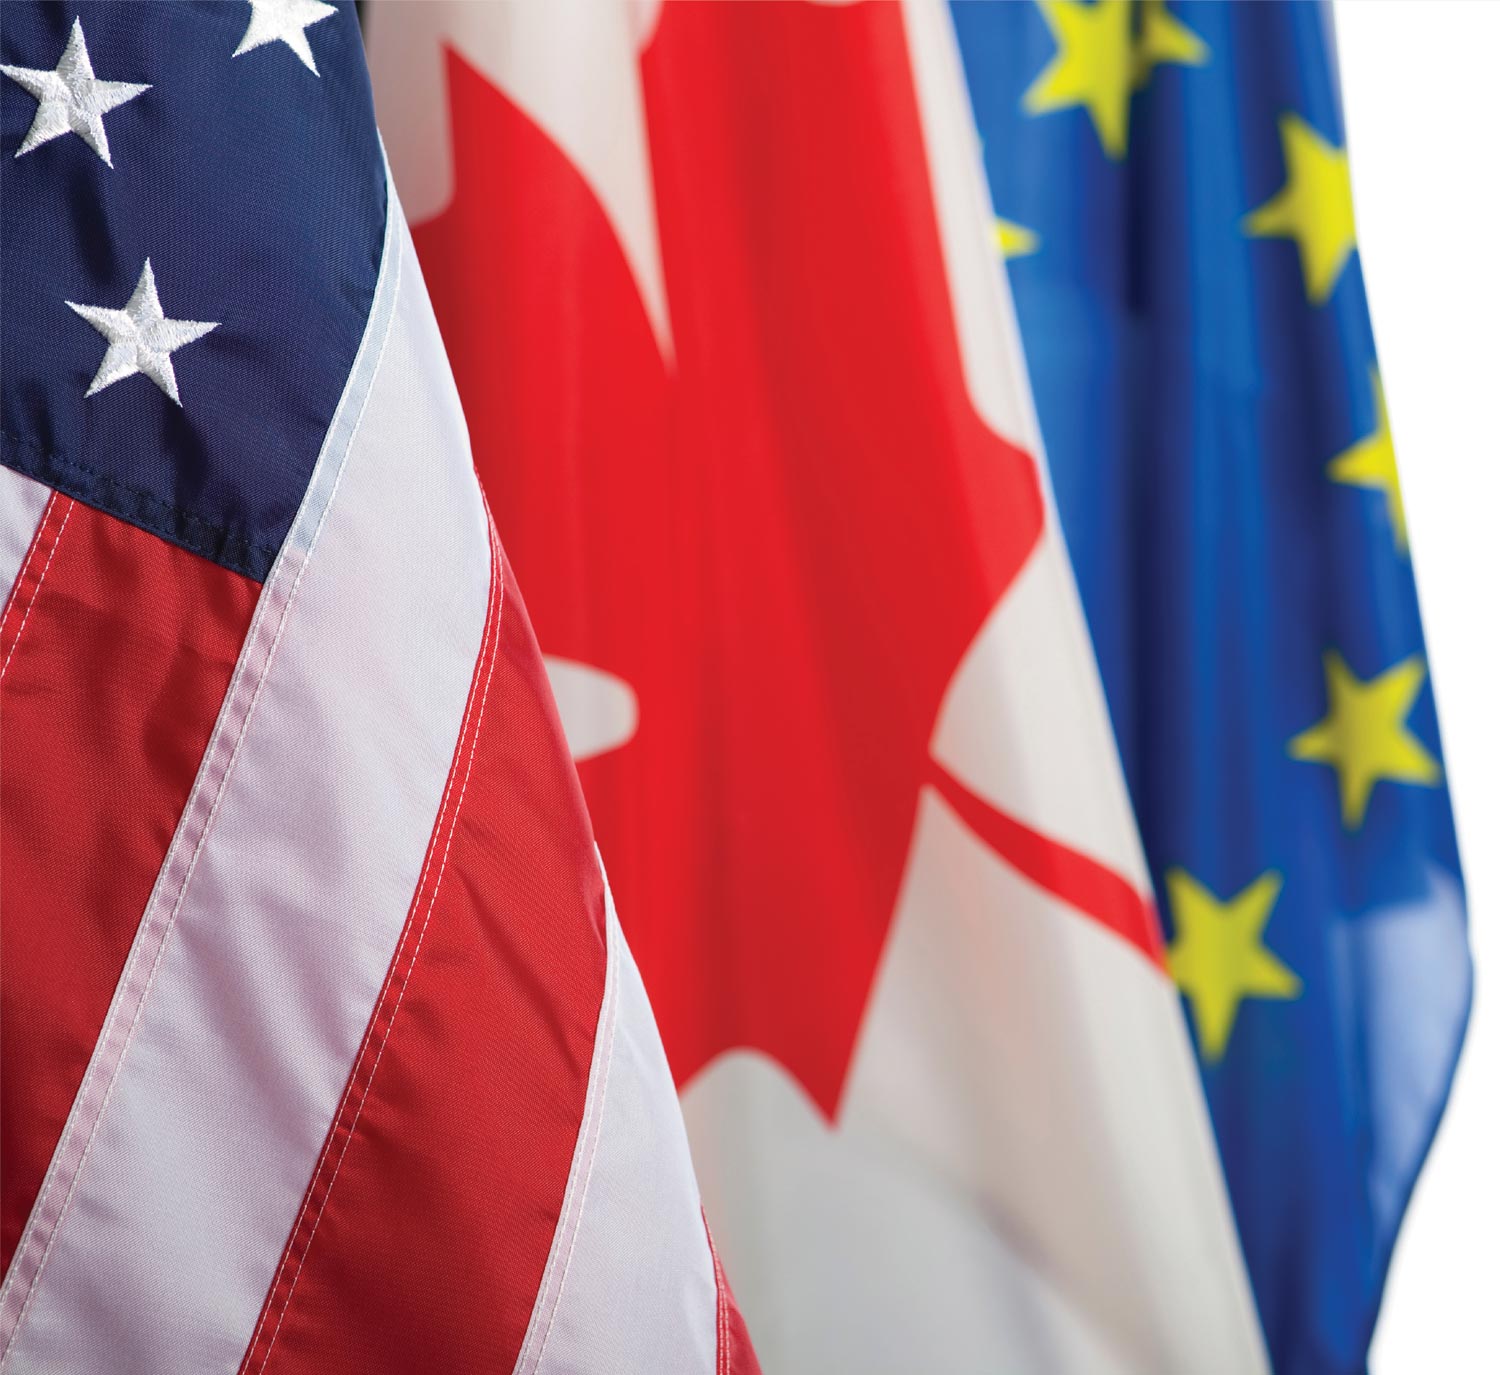 close view of the U.S., Canadian and European flags